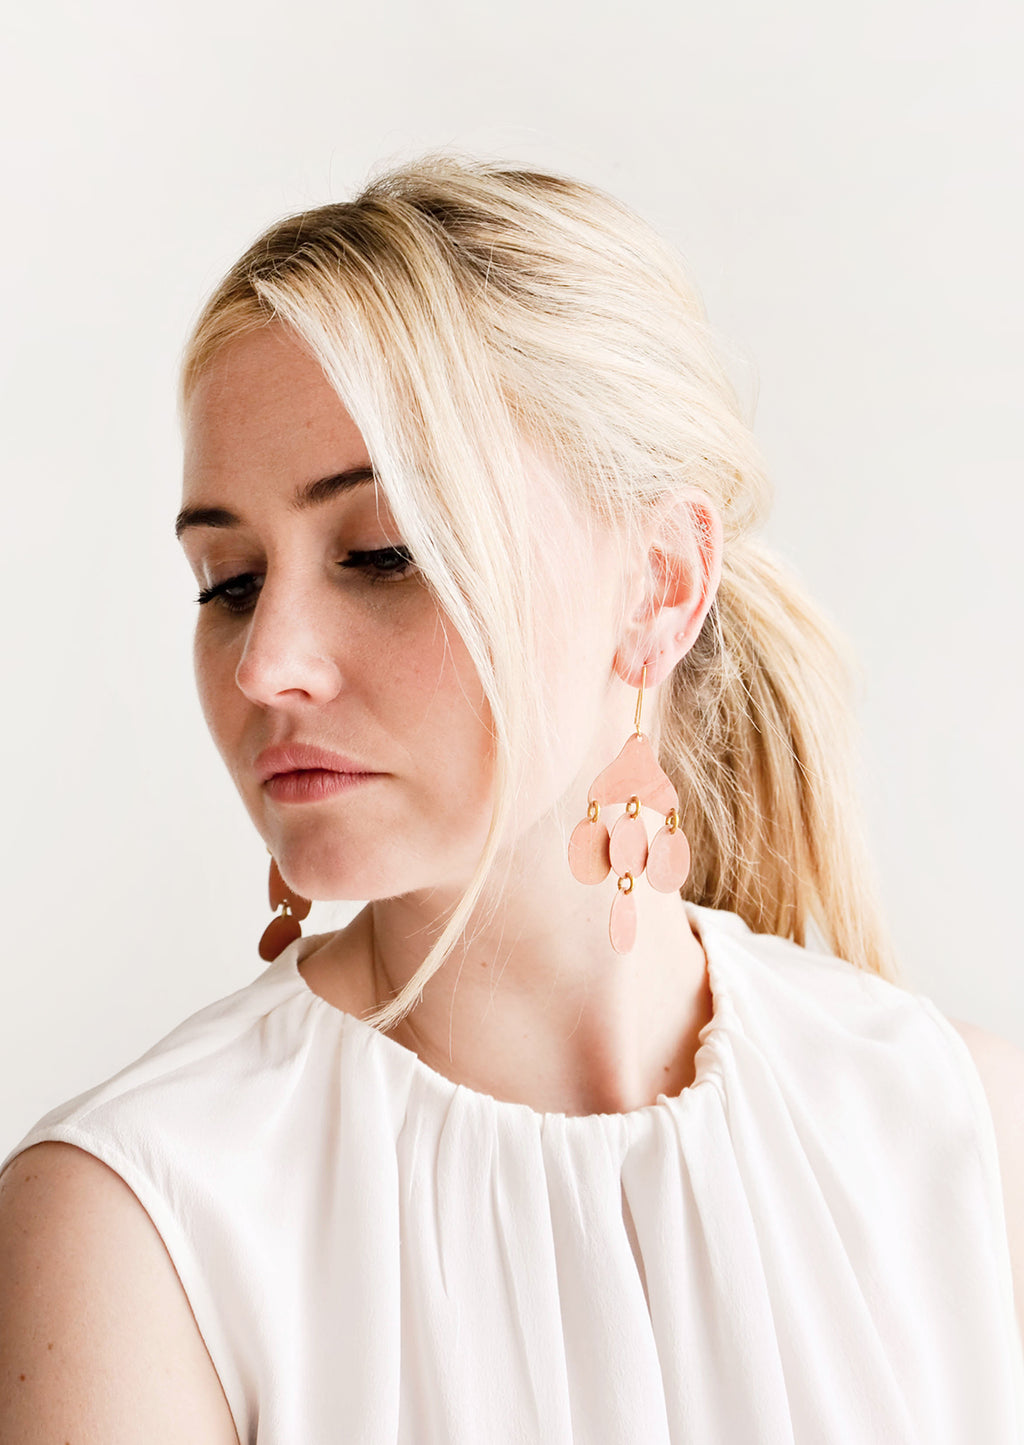 4: Model shot showing woman wearing earrings and a white top.